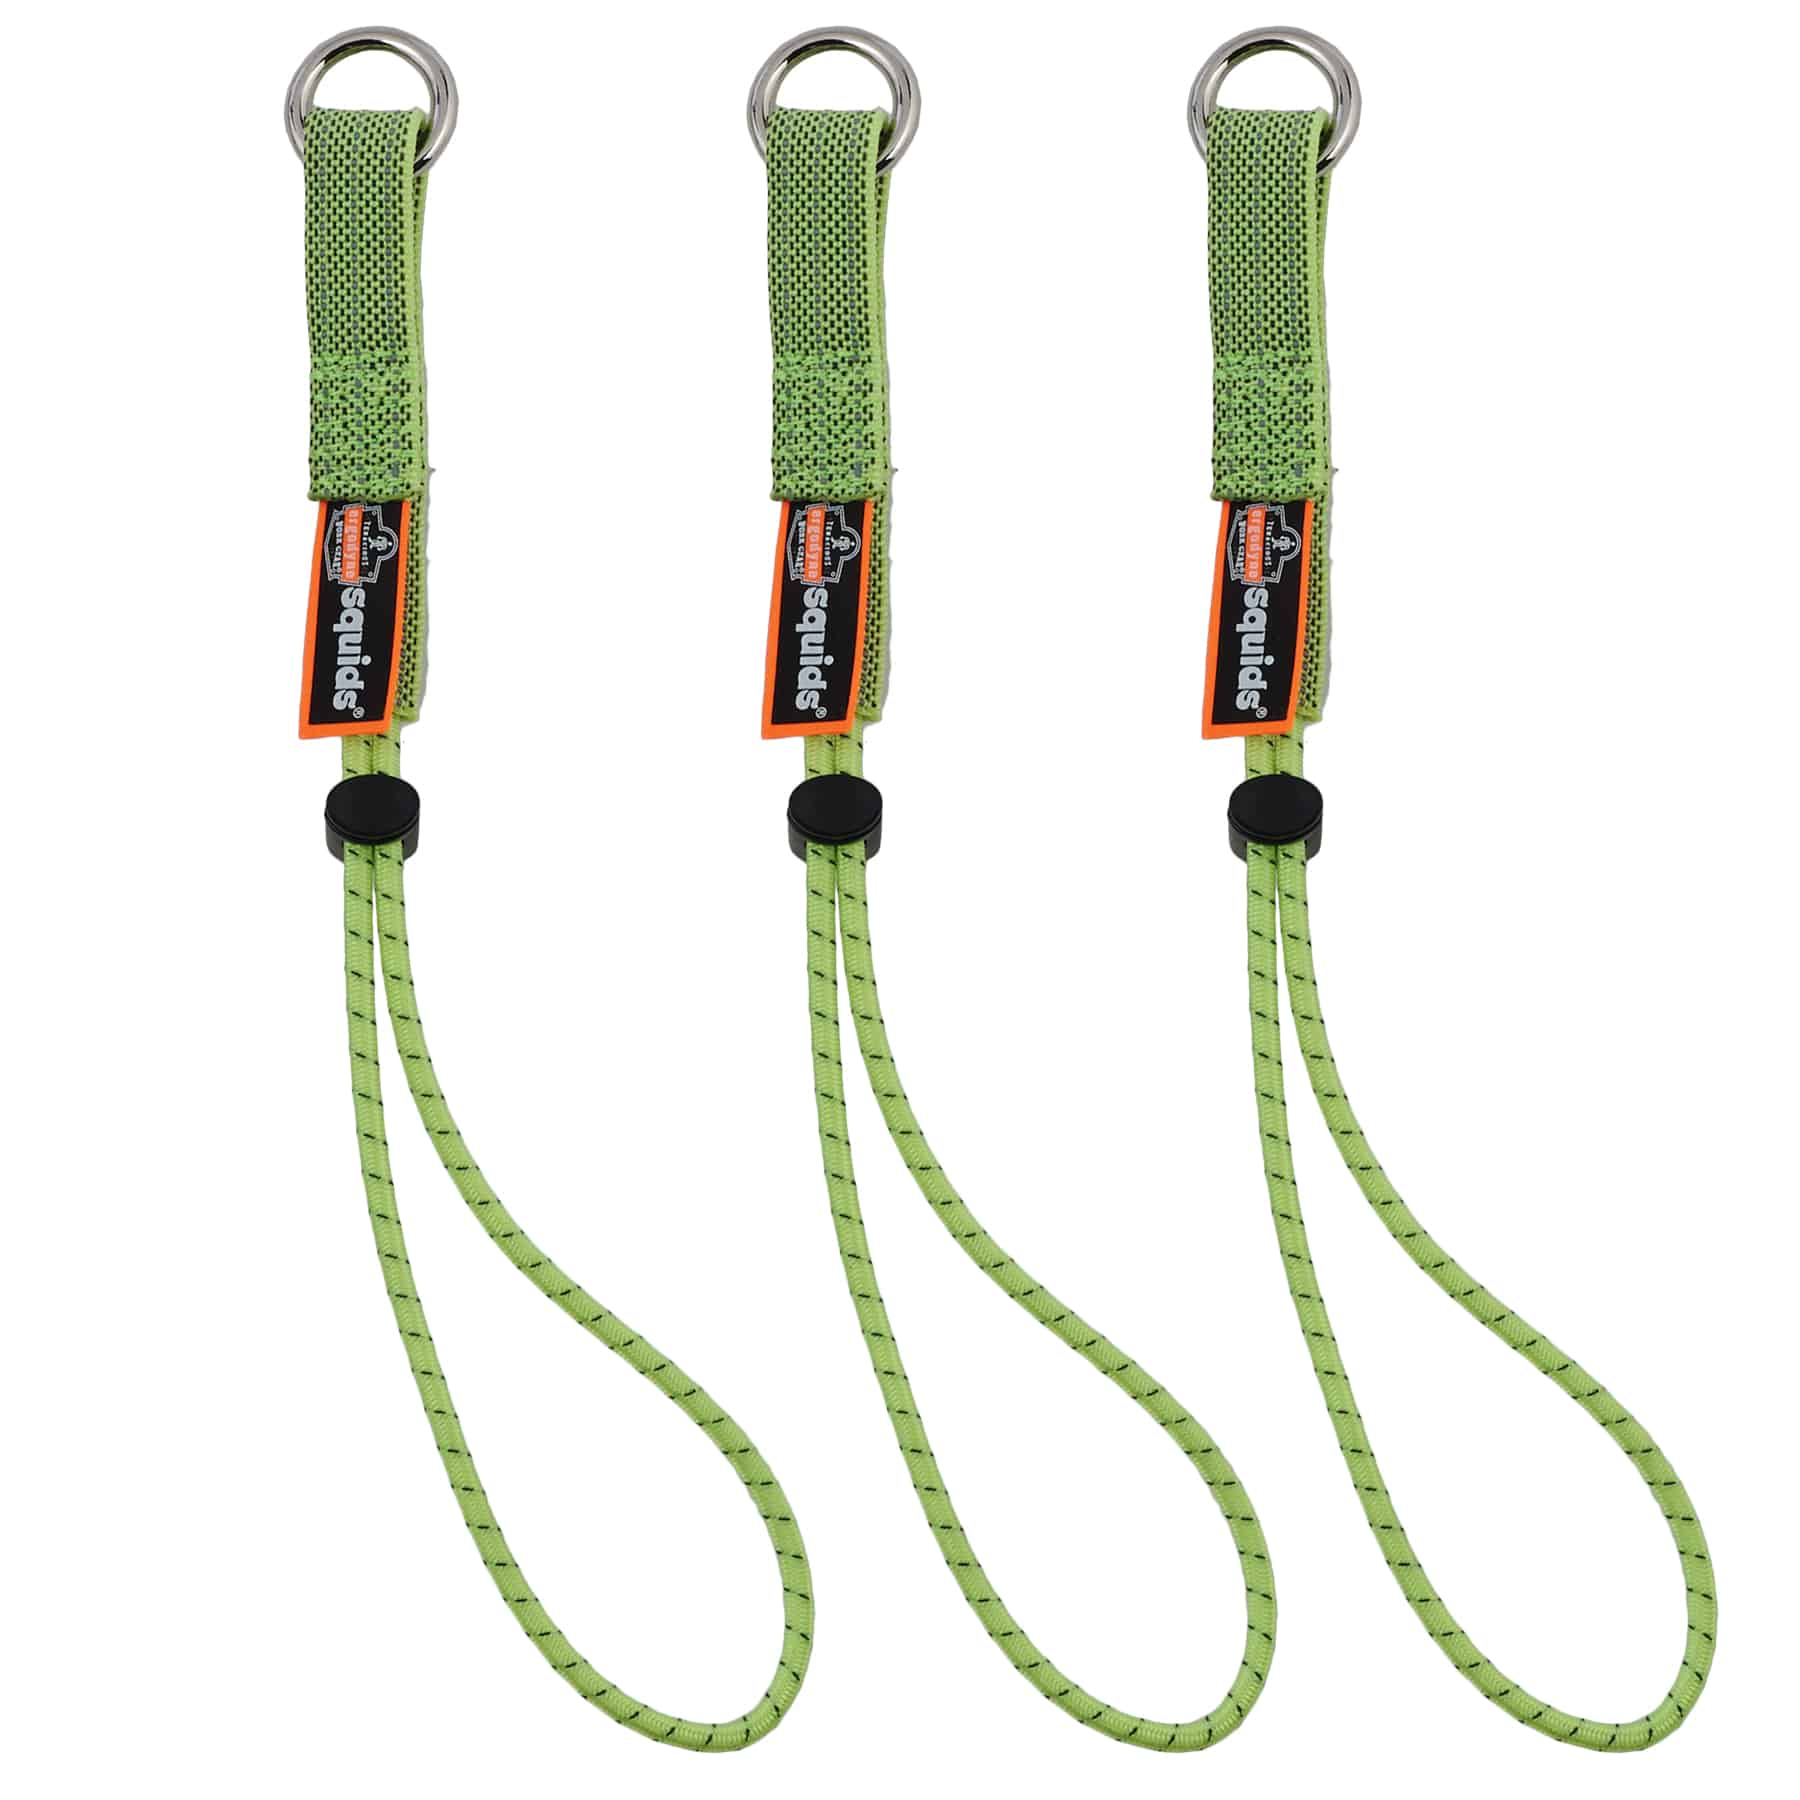 5 Pieces Fishing Cords, Fishing Tools Safety Elastic Rope Multicolor Fishing  Ropes Boat Secure Retractable Coiled Tether With Carabiner, Fish Tools Fi